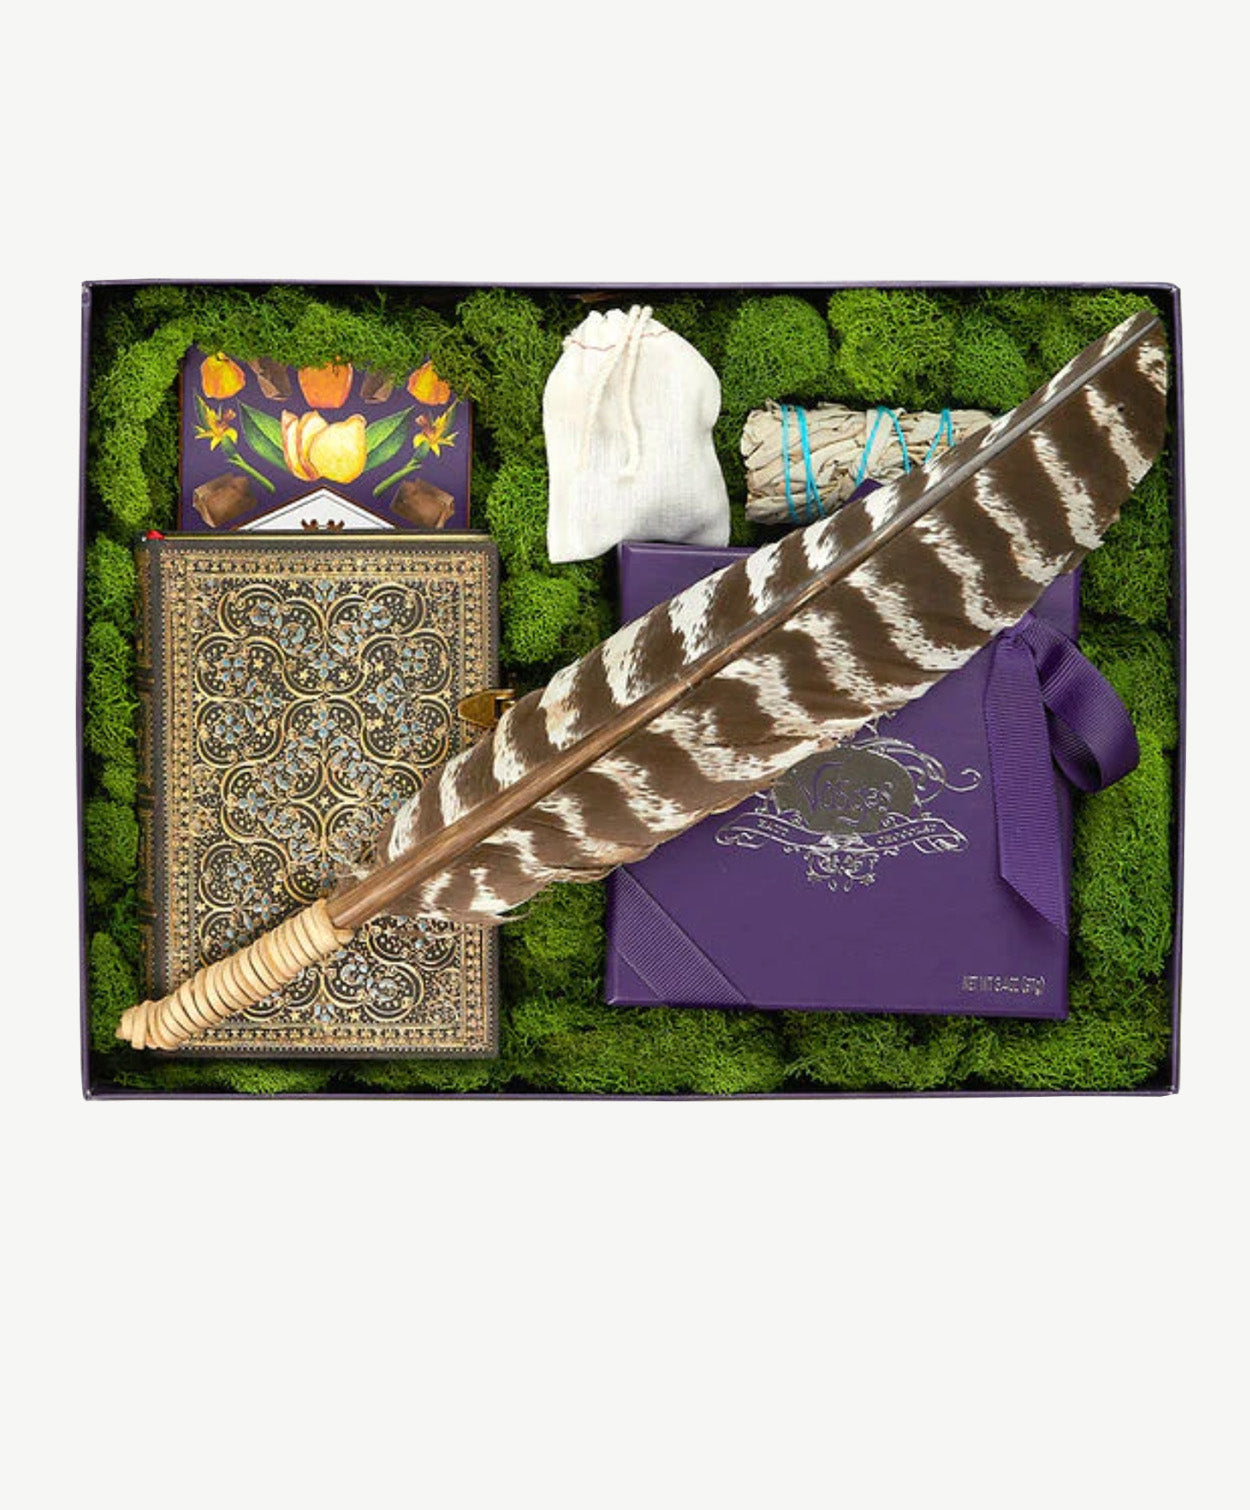 A vosges chocolate truffle collection sits beside an ornately decorated journal, sage bundle, bag of crystals and a stripped turkey feather wrapped with leather cord sit in a moss filled purple gift box on a white background.